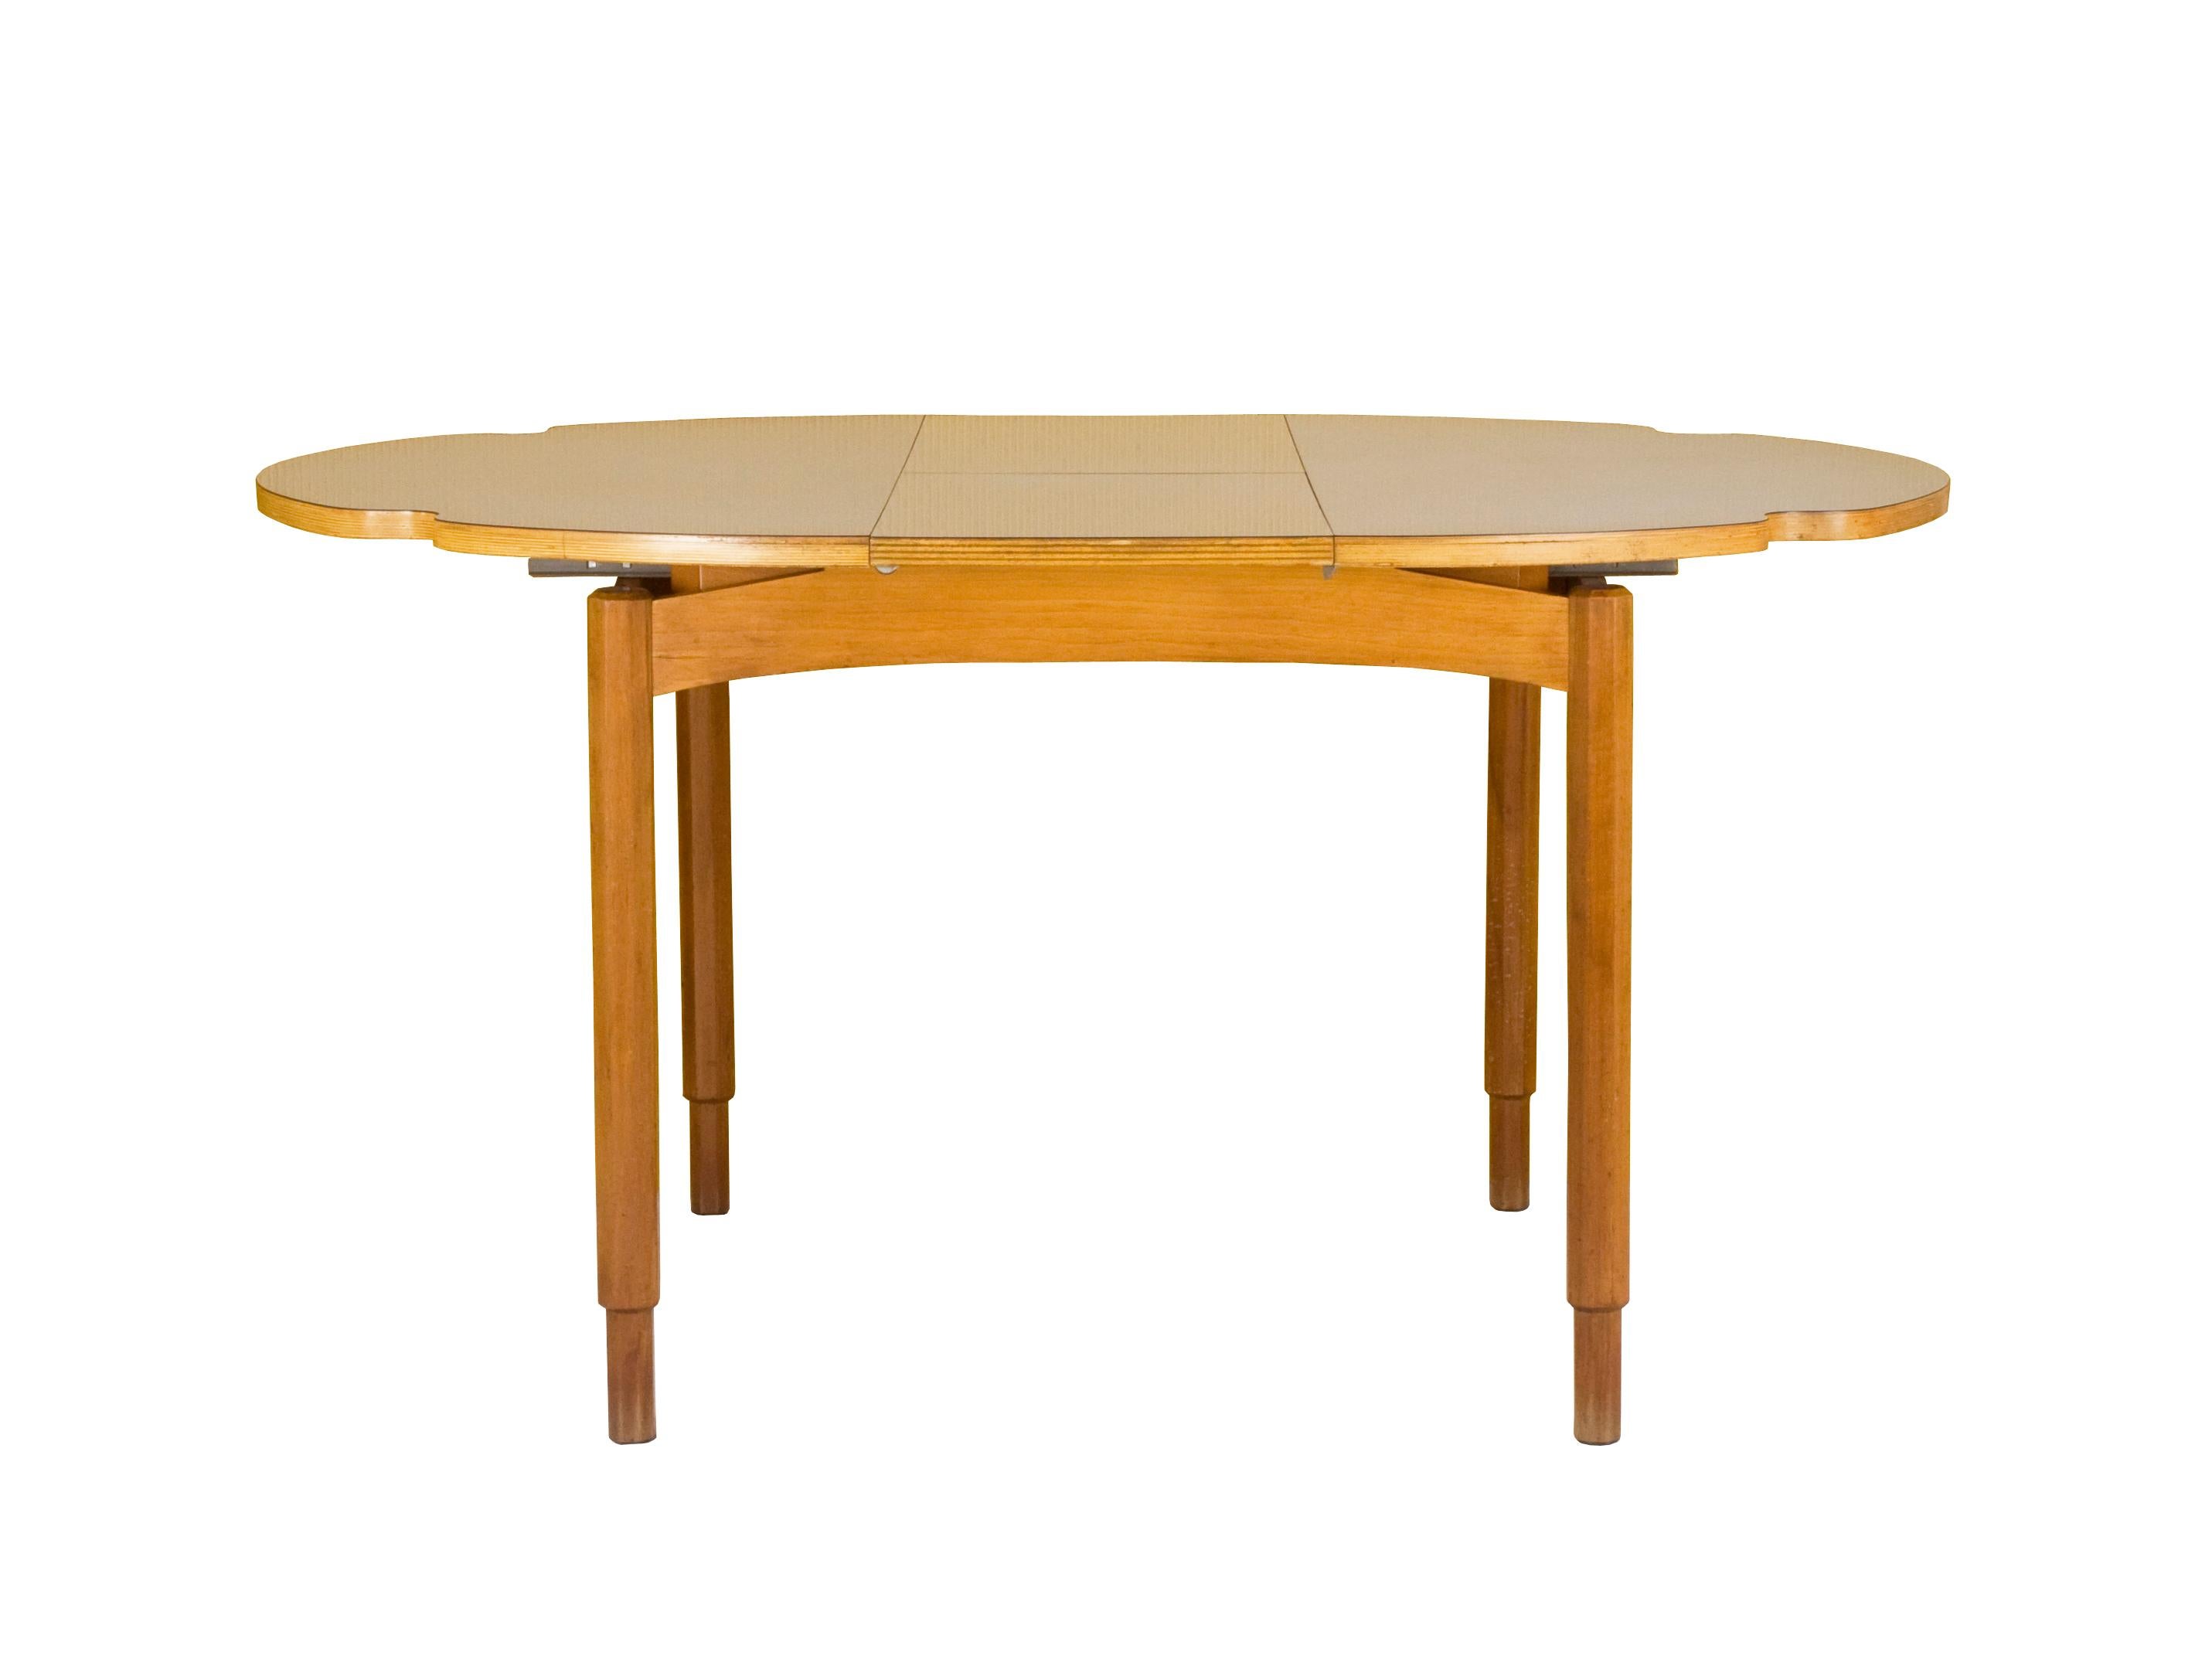 Italian dining table with extensible top. Made of wood and white laminate top surface. It remains in very good vintage condition: wear consistent with age and use. 

Top's measures: close 110 x 110 cm, open 110 x 145.5 cm.